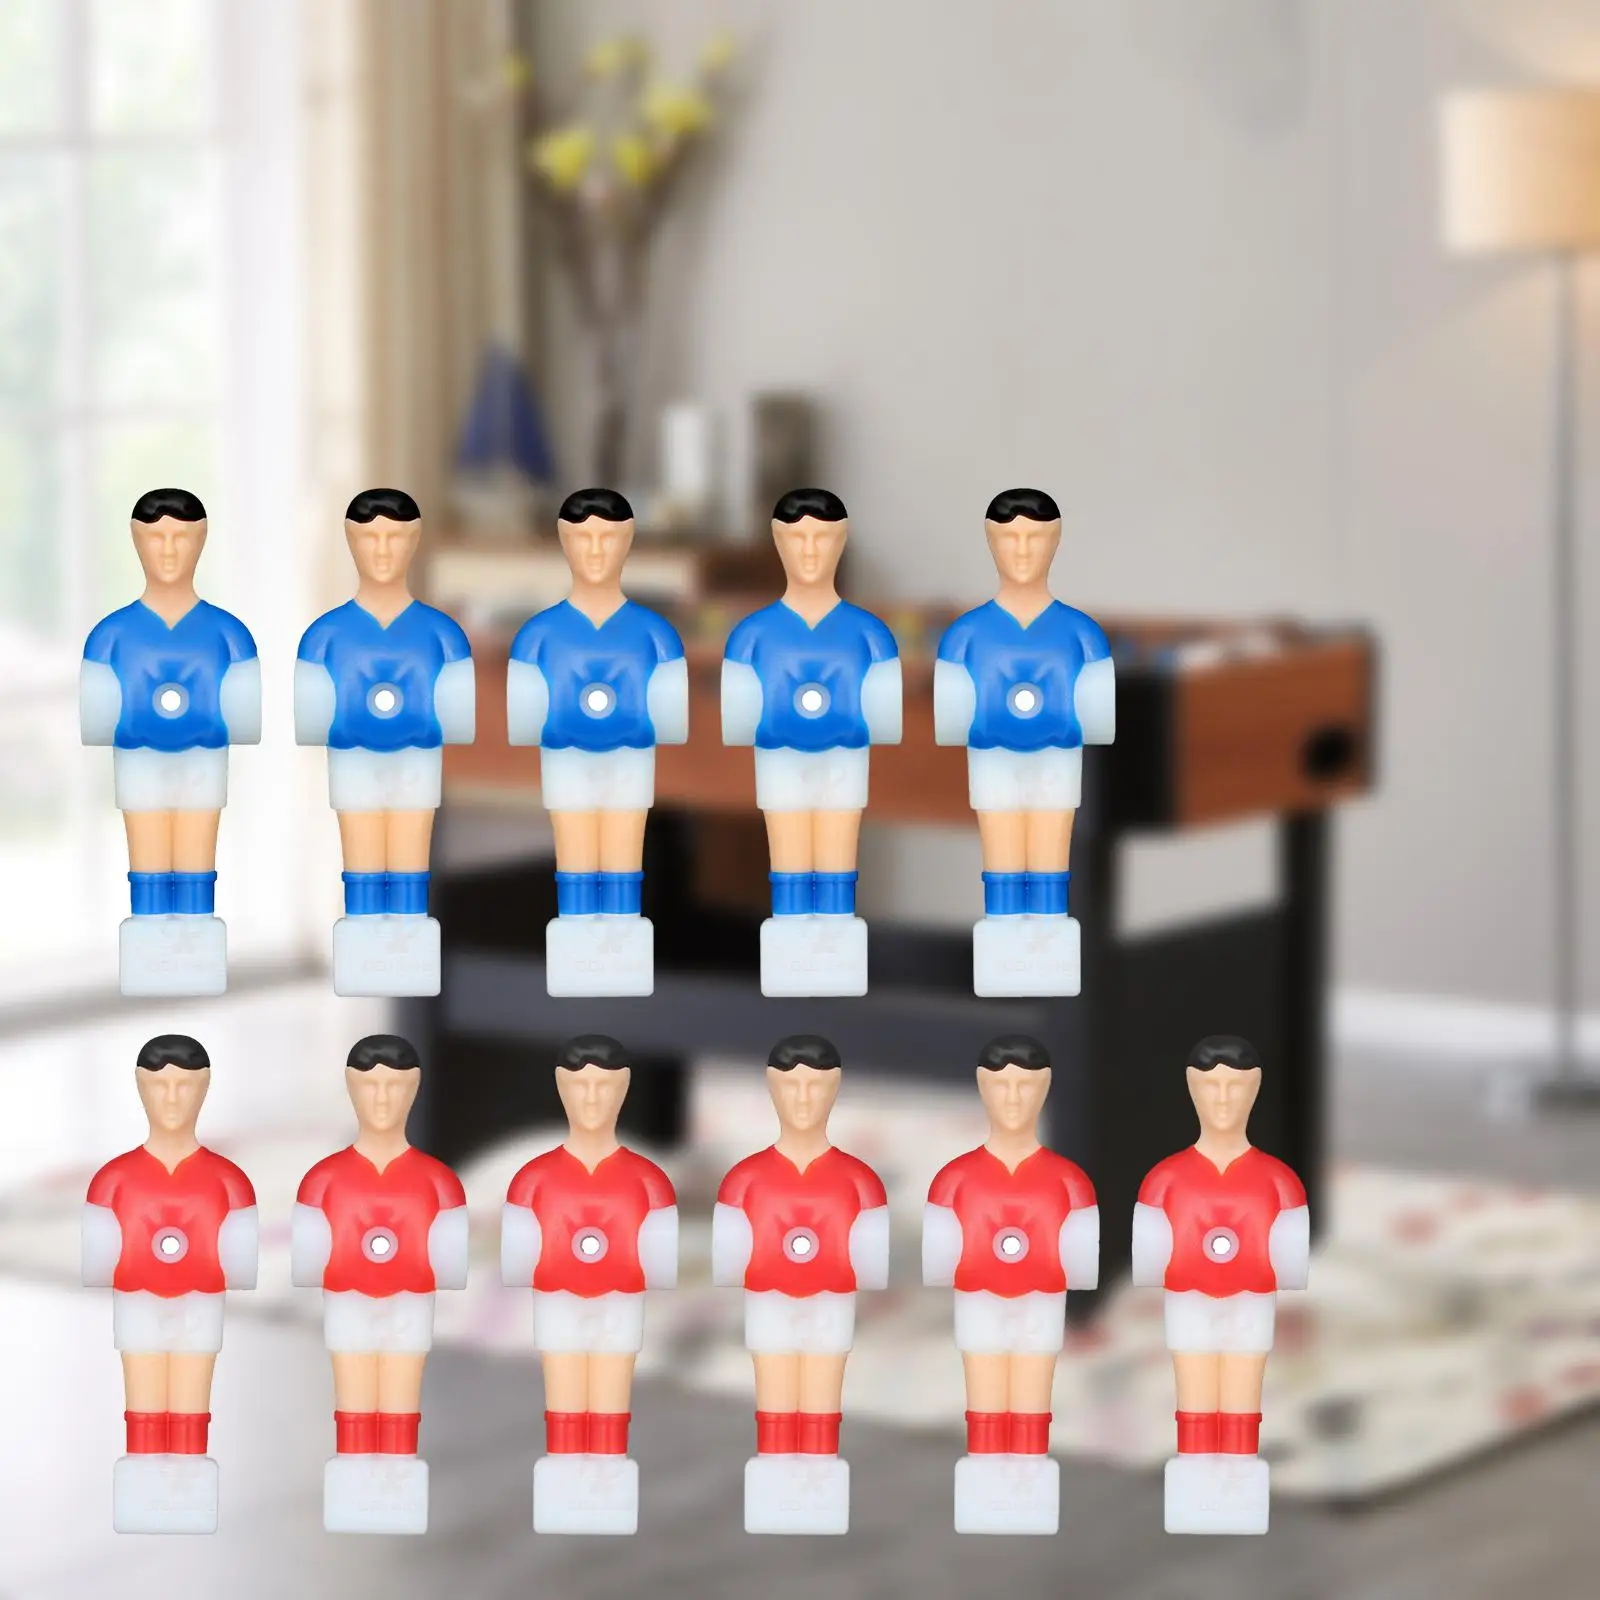 11x Foosball Men Replacements Soccer Table Player Foosball Soccer Table Football